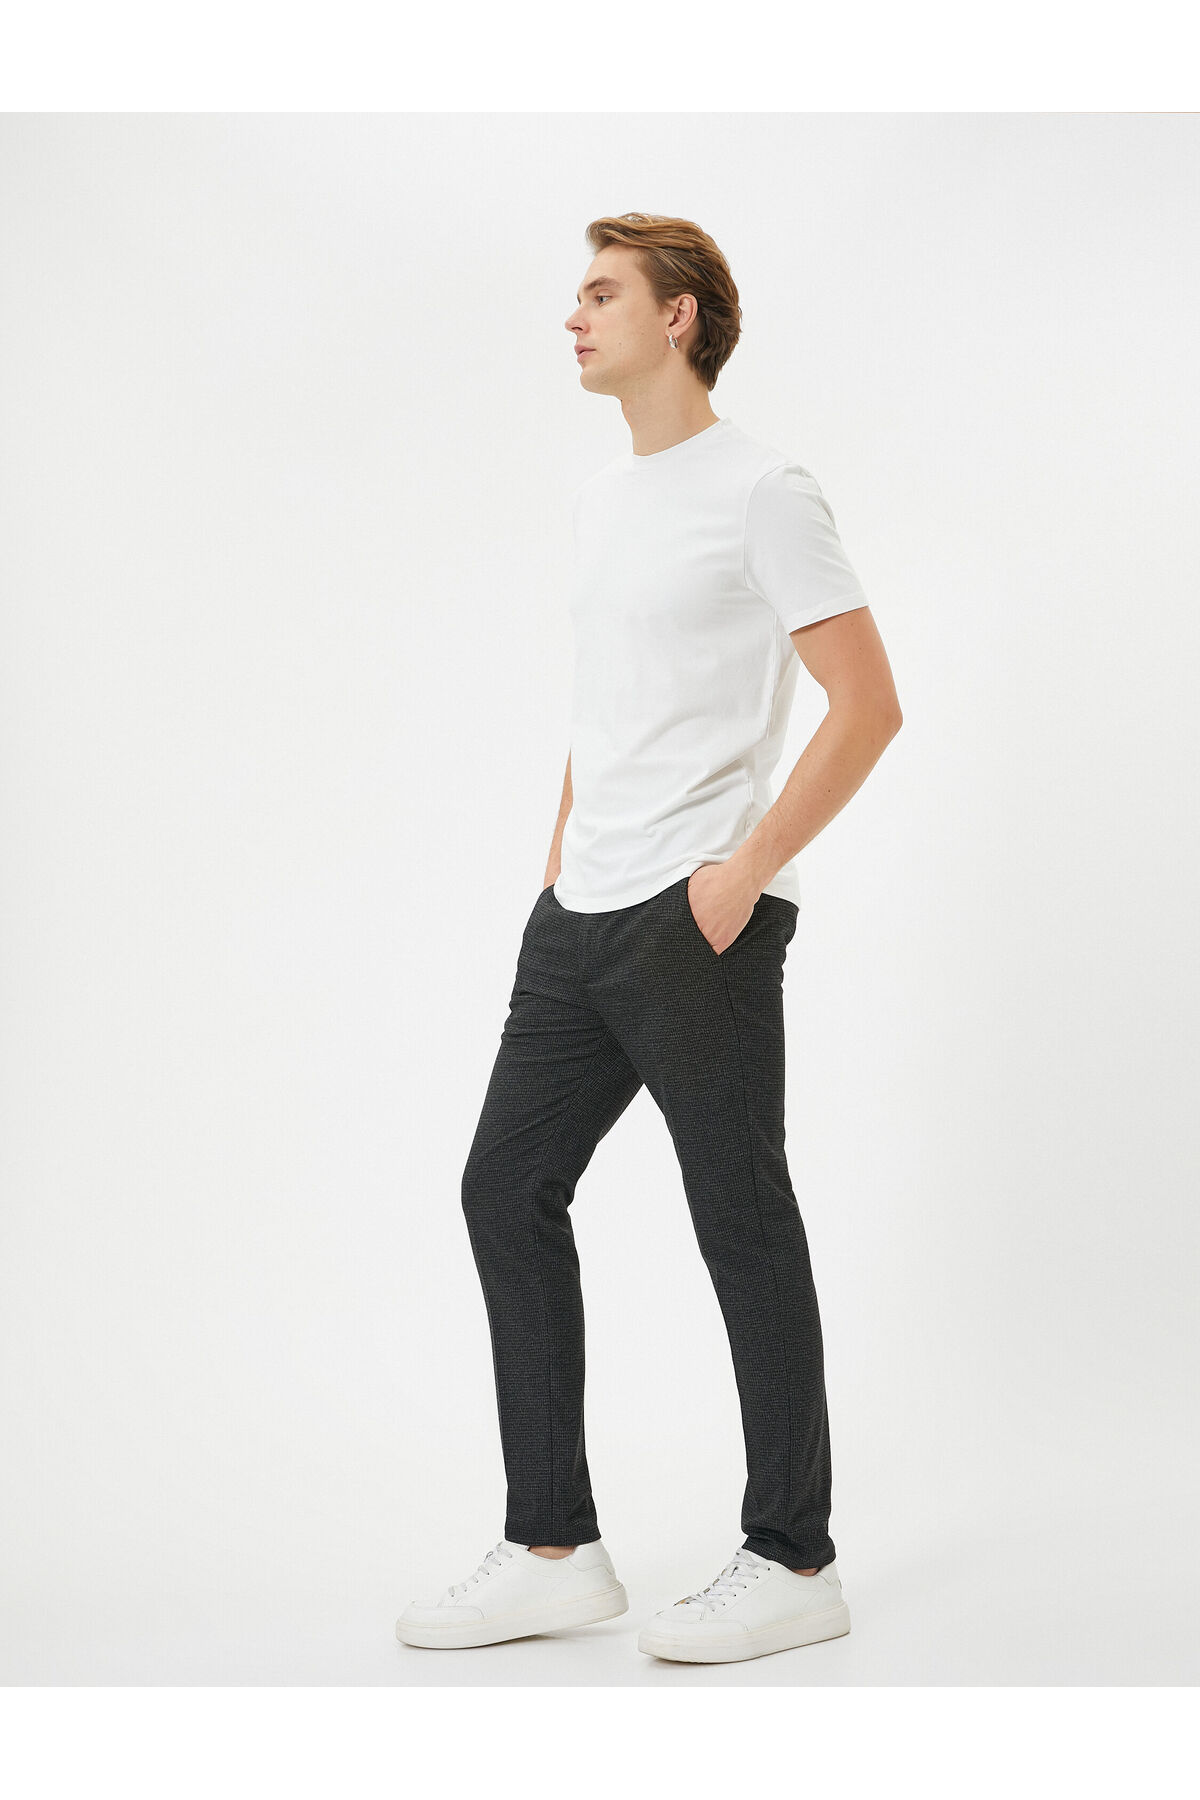 Koton Fabric Trousers Patterned Slim Fit Buttoned Pocket Detailed